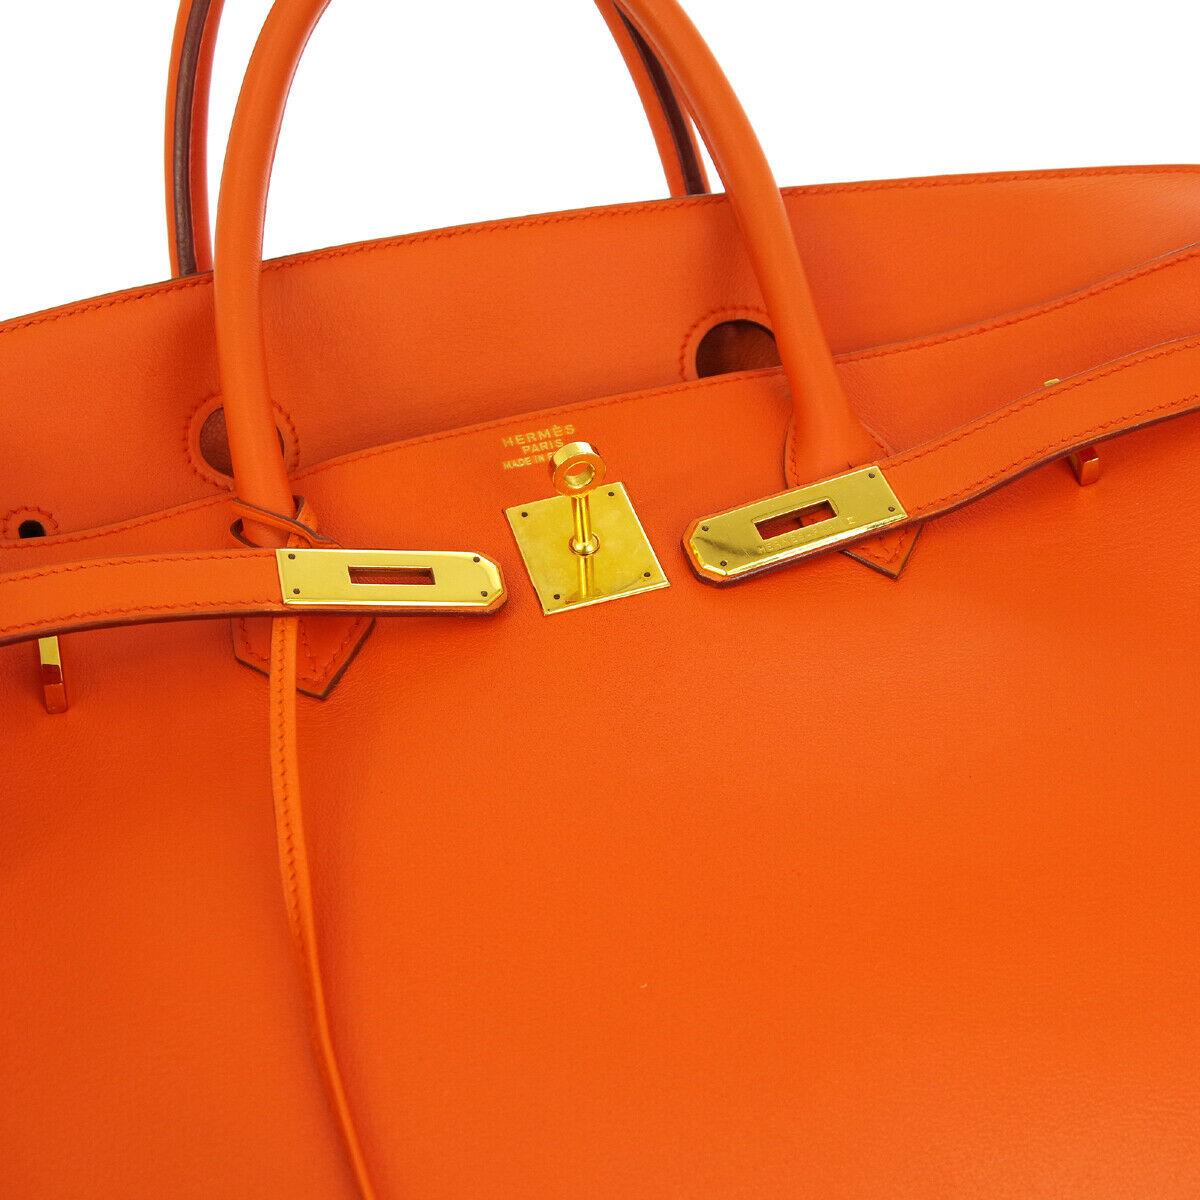 Hermes Birkin 40 Orange Leather Gold Travel Carryall Top Handle Satchel Tote

Leather
Gold tone hardware
Leather lining
Date code present
Made in France
Handle drop 4.25